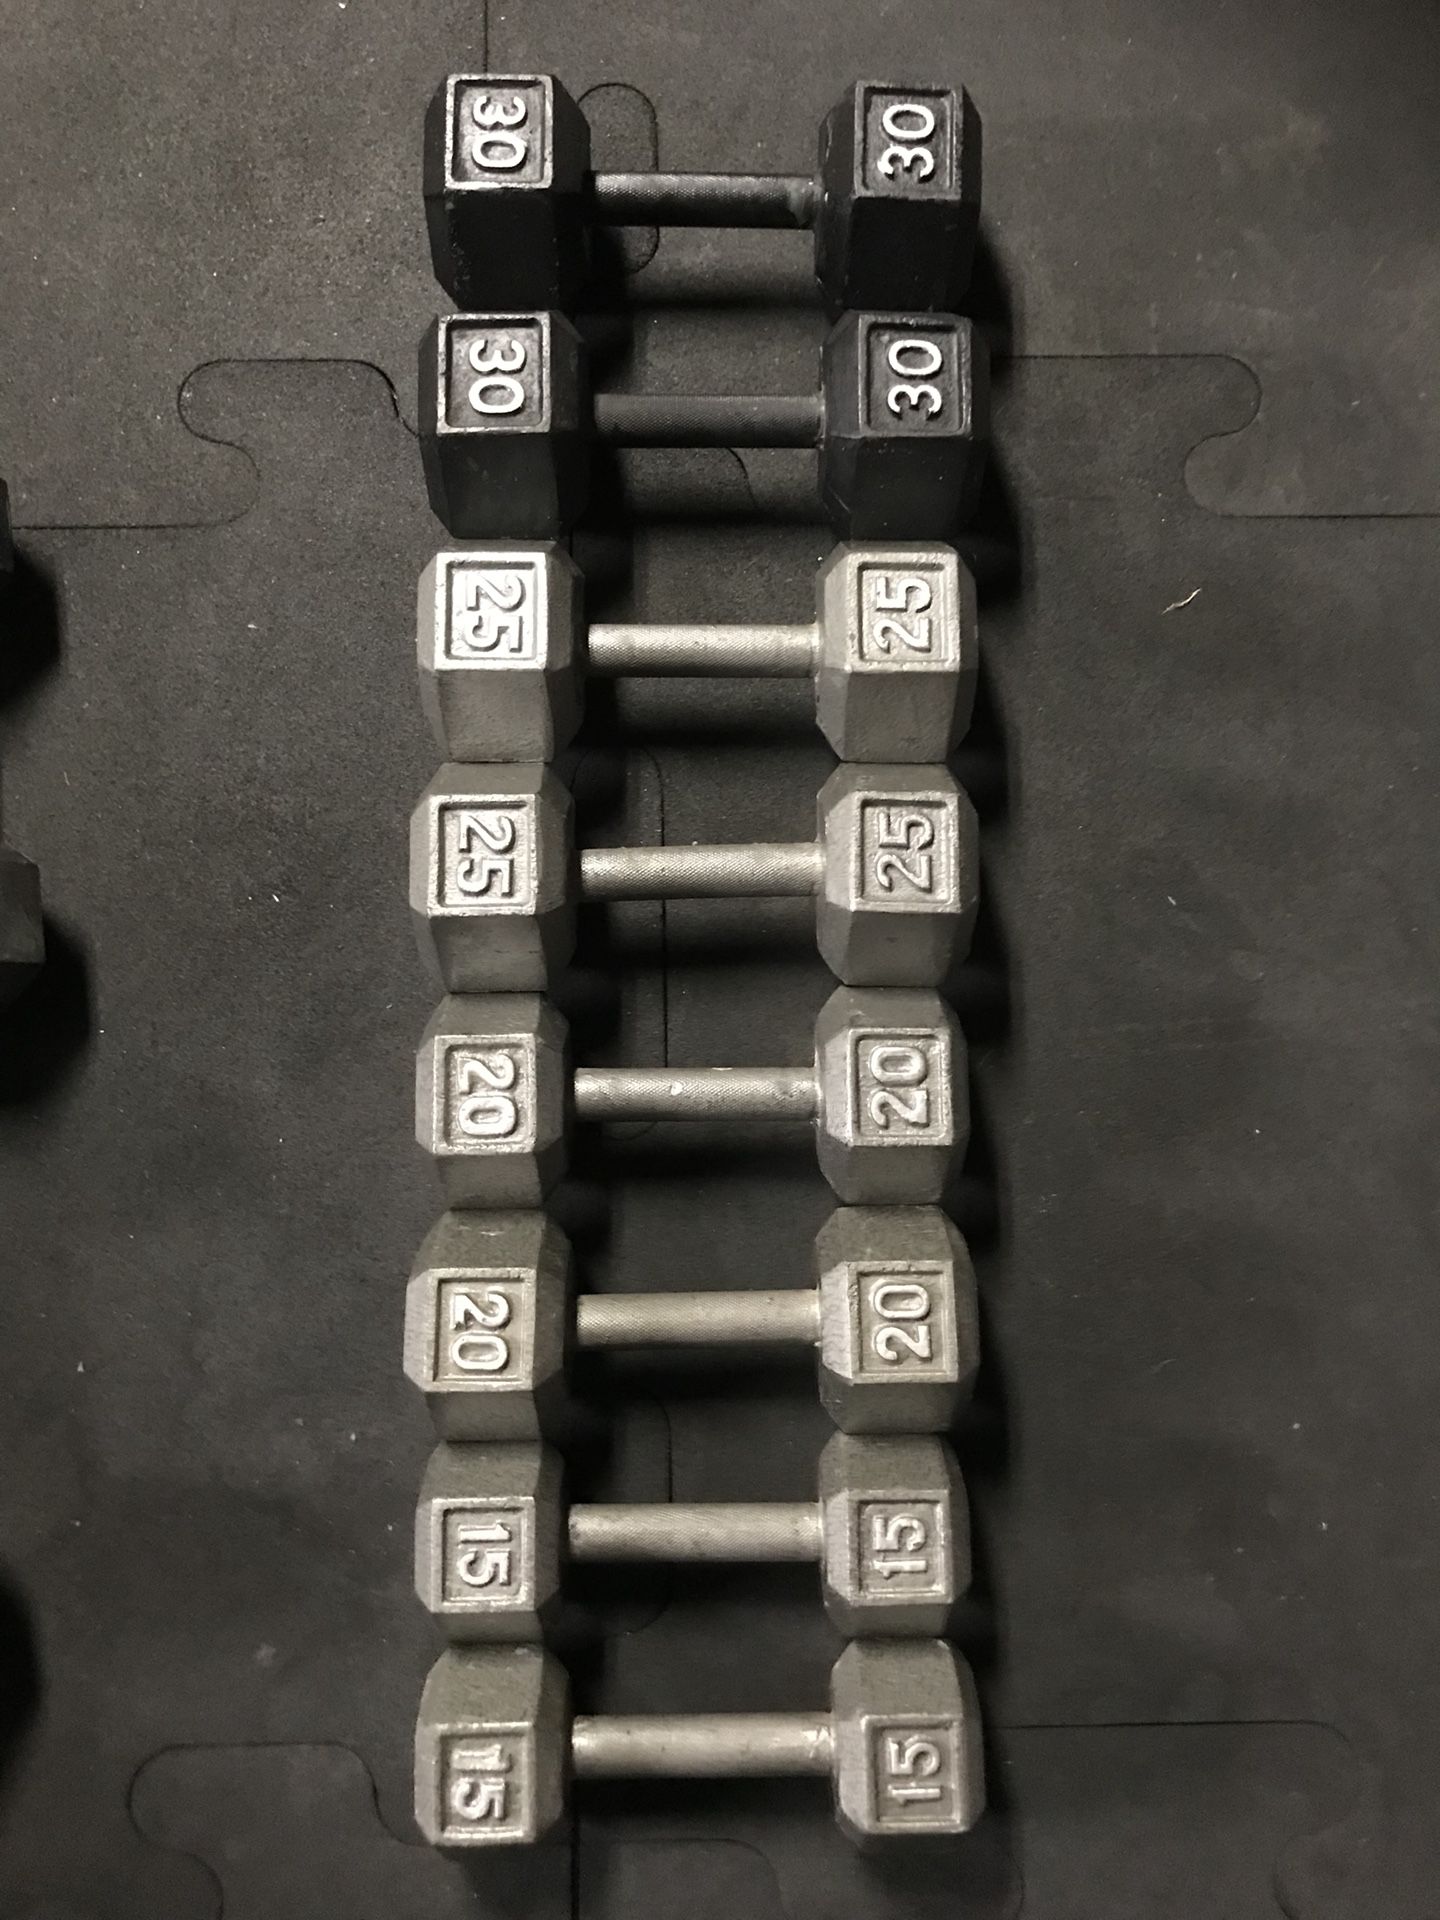 Hex Dumbbells (2x15s 2x20s 2x25s 2x30s) for $130 Firm!!!